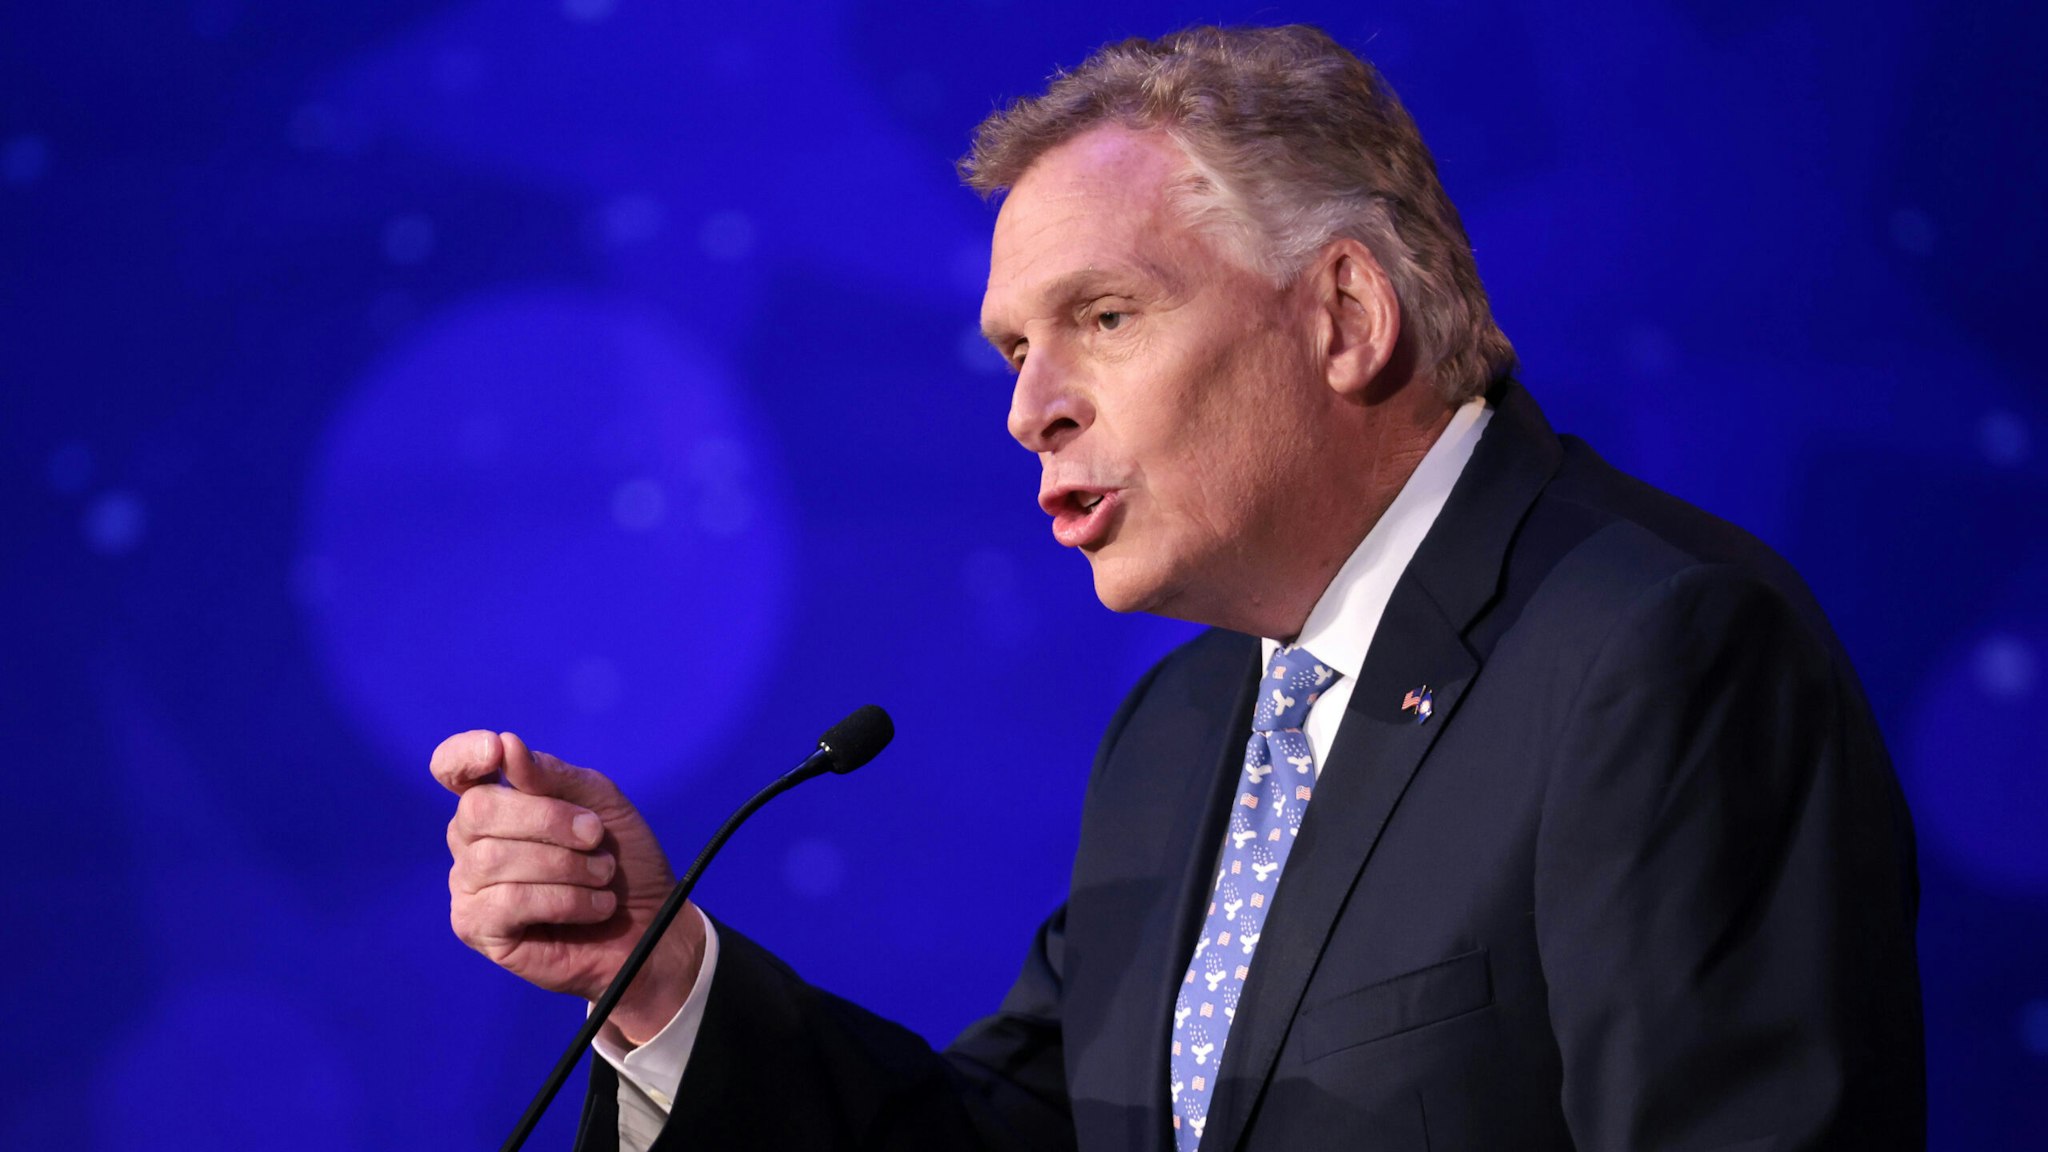 ALEXANDRIA, VIRGINIA - SEPTEMBER 28: Former Virginia Gov. Terry McAuliffe (D-VA) answers a question in a debate with Republican gubernatorial candidate Glenn Youngkin hosted by the Northern Virginia Chamber of Commerce September 28, 2021 in Alexandria, Virginia. The gubernatorial election is November 2.